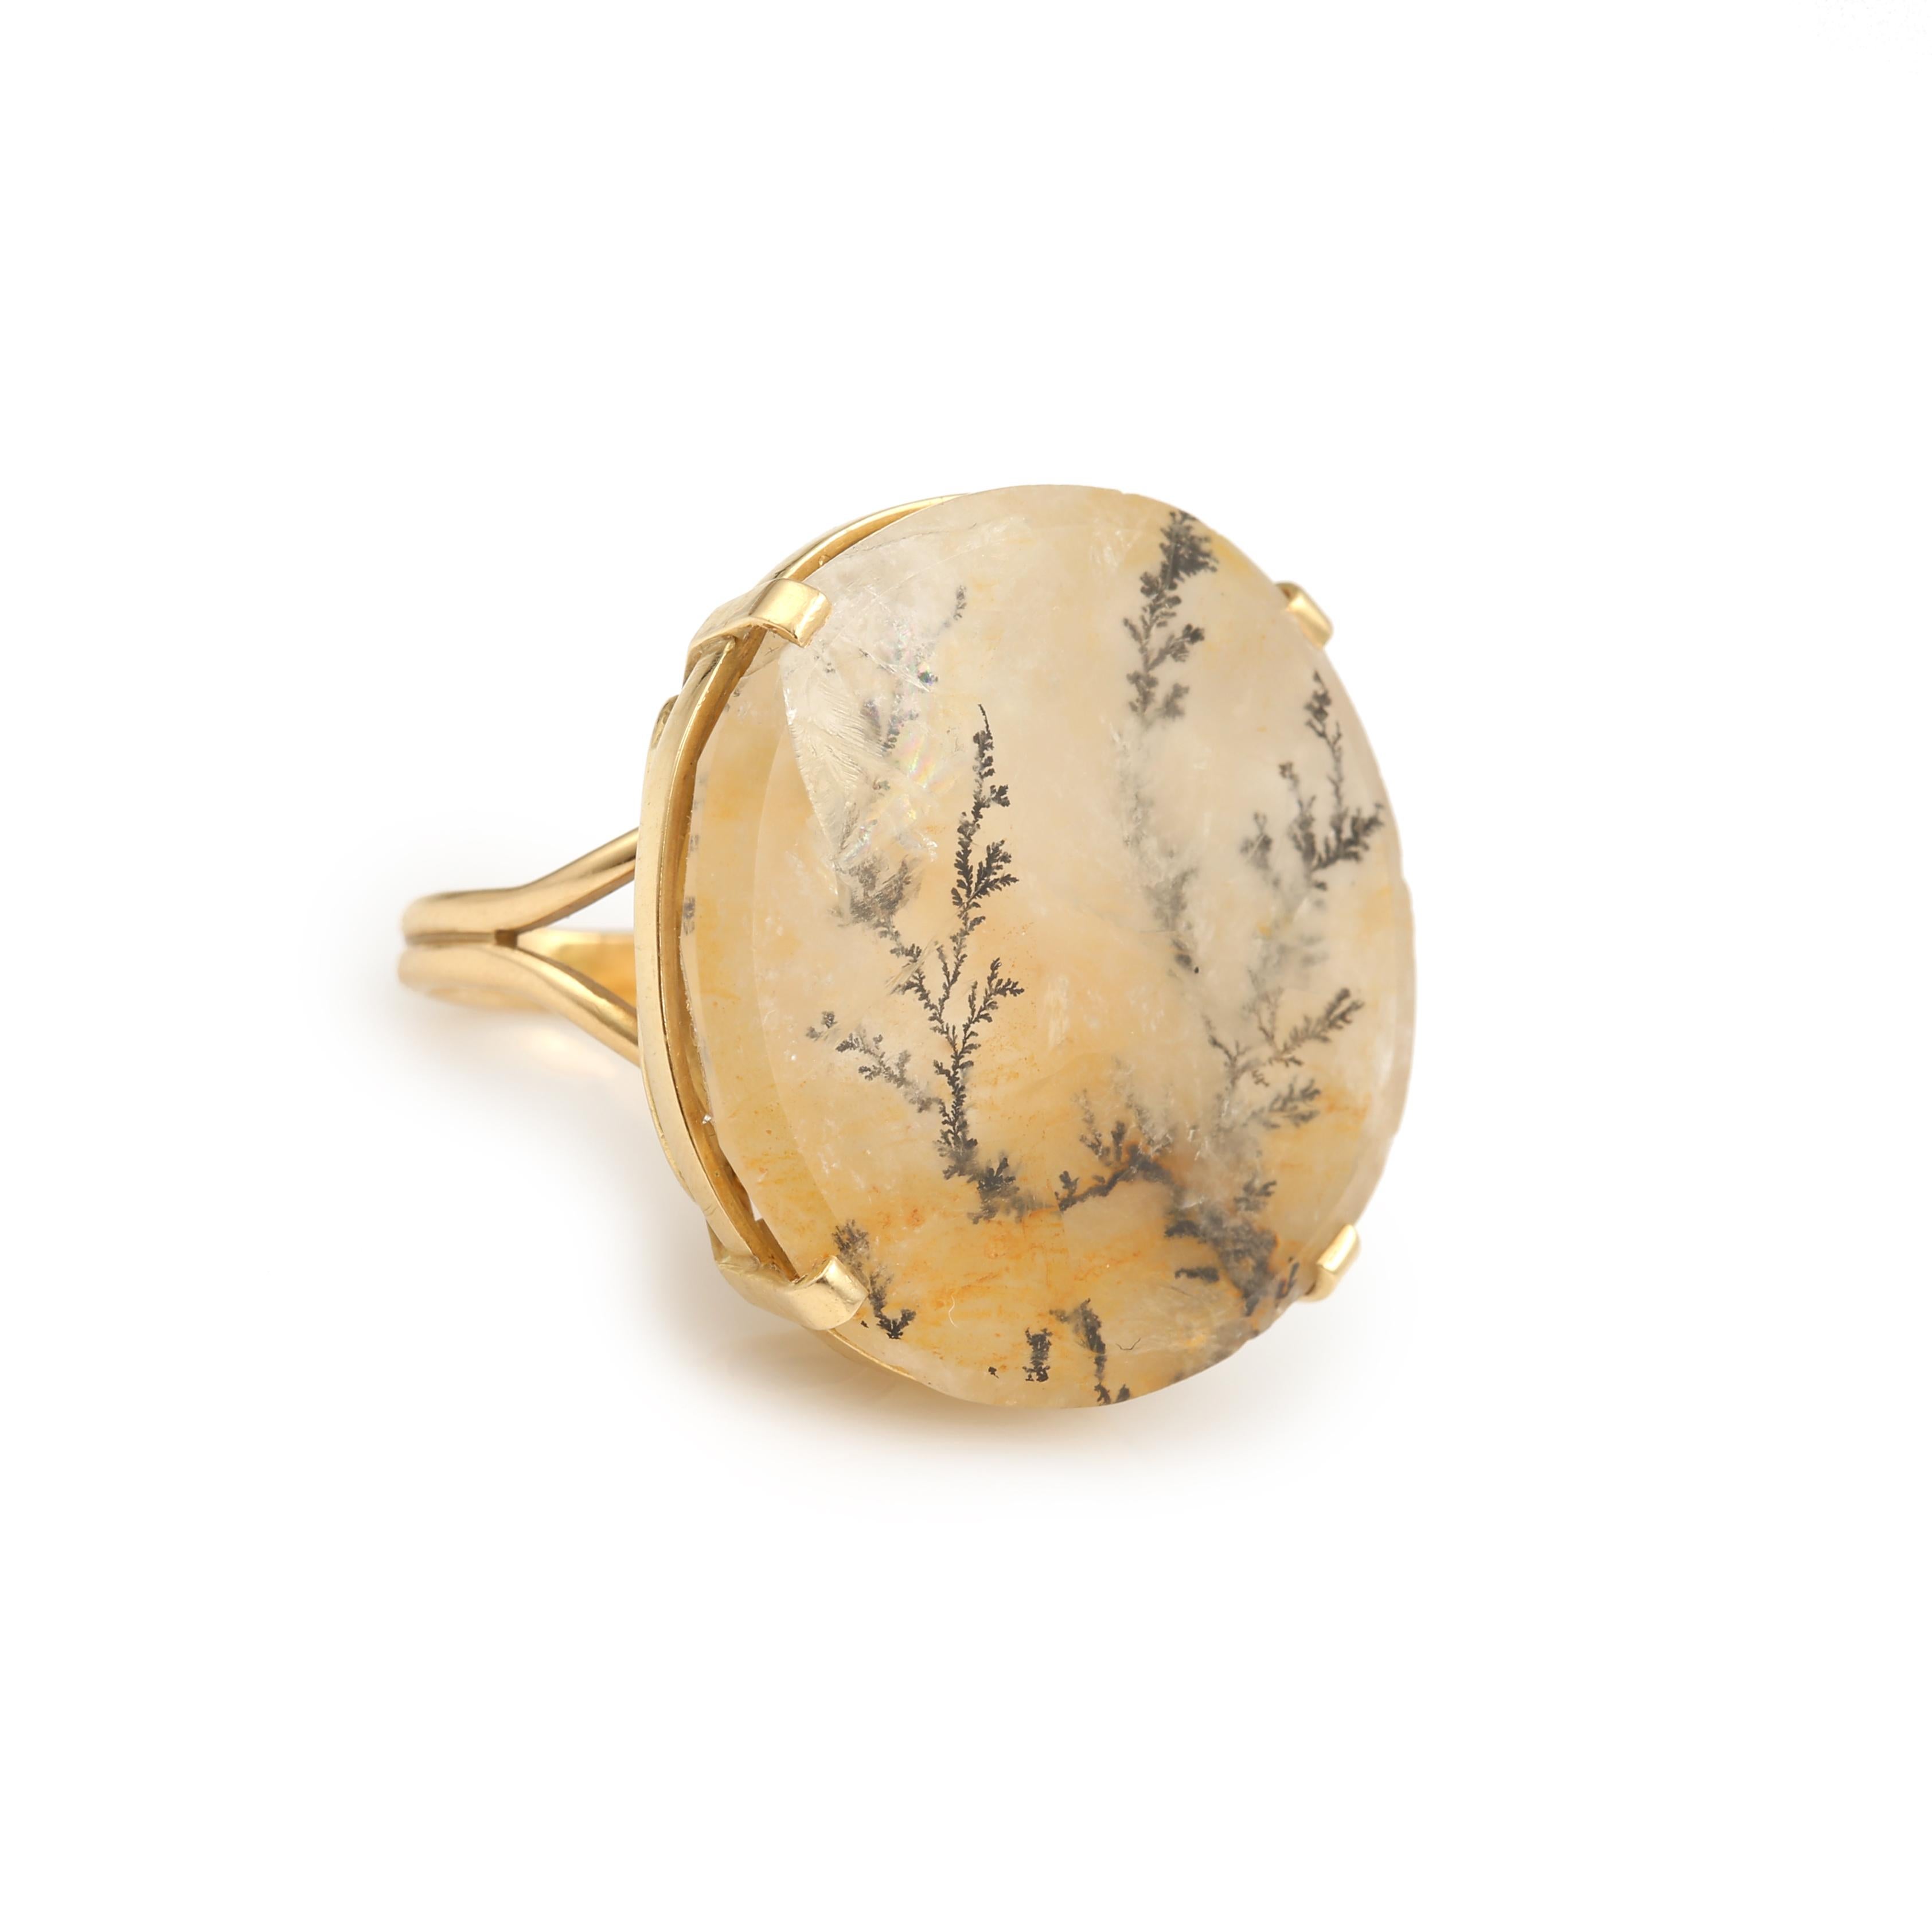 Original yellow gold cocktail ring set with a large plate of dendritic quartz.

Estimated weight of quartz: 46.50 carats

Ring size: 26.84 x 26.92 x 9.12 mm (1.056 x 1.06 x 0.359 inch)

Finger size: 50 (US: 5 1/4)

Total weight of the ring :